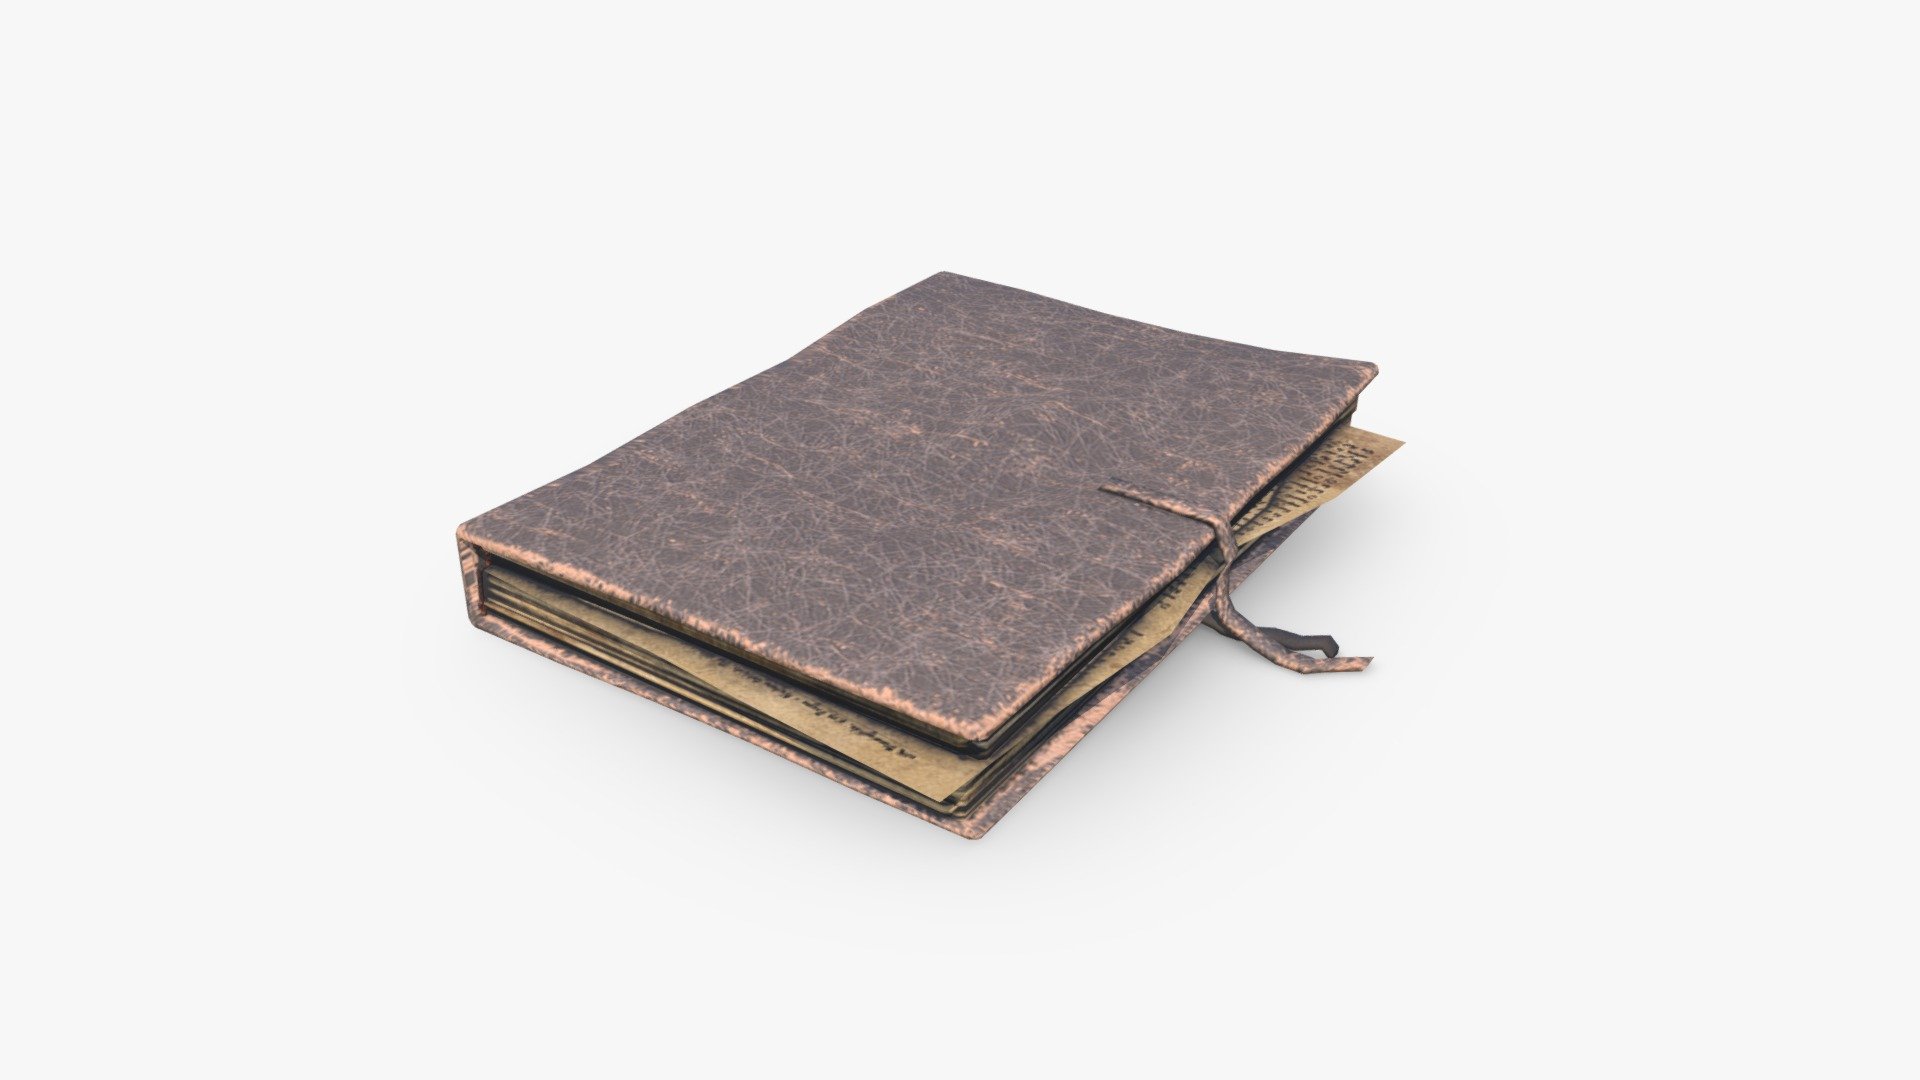 Check out my website for more products and better deals! &amp;gt;&amp;gt; SM5 by Heledahn &amp;lt;&amp;lt;

This is a digital 3D model of an Old Field Journal or Diary, made of pig skin leather and parchment paper. The leather has been worn out by use and the environmental conditions on the road.

This model offers a charming antique look, perfect for Medieval, Fantasy or Steampunk settings, either as a background prop, or as a closeup prop due to its incredible amount of detail and realism.

This product will achieve realistic results in your rendering projects and animations, being greatly suited for close-ups due to their high quality topology and PBR shading 3d model